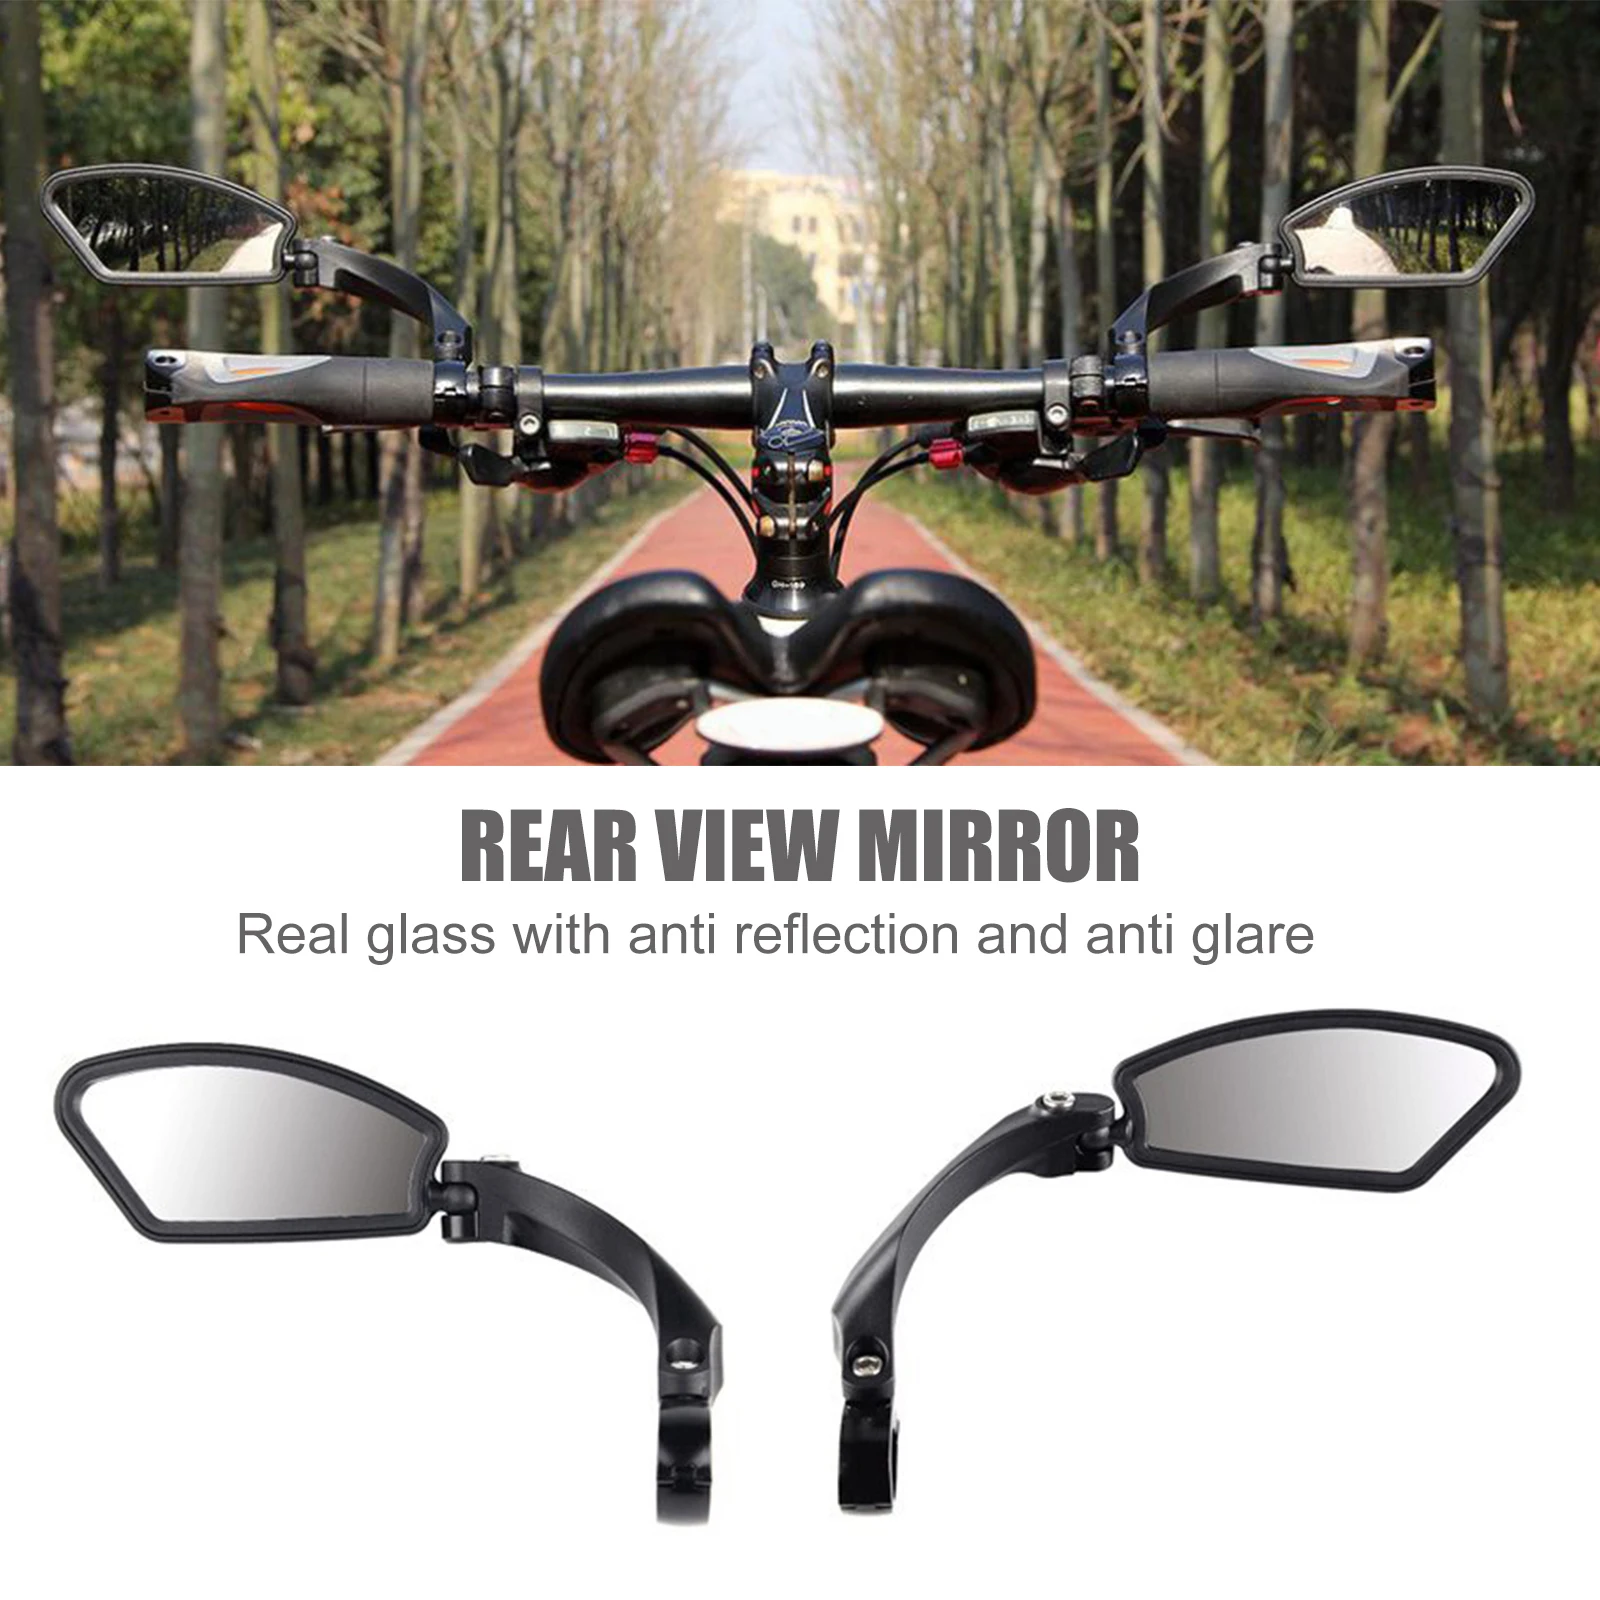 CYCEARTH Bike Mirror 2pcs Bicycle Cycling Rear View Mirrors Convex Mirror with Adjustable Handlebar Installation Suitable for Mountain Road Bikes HD Safety Rearview Mirror 